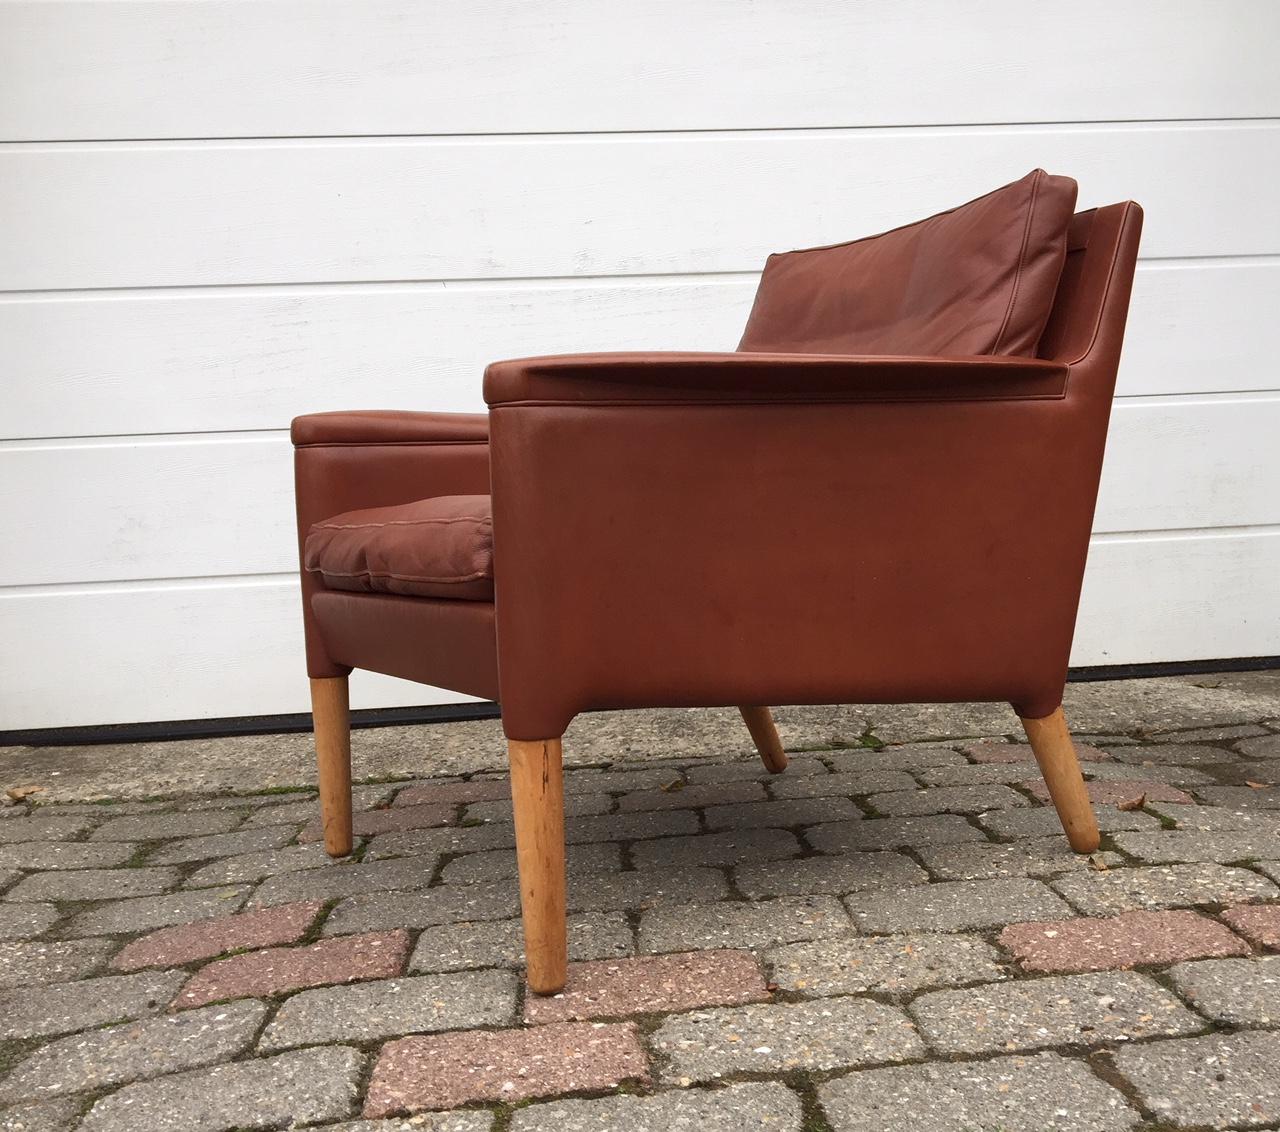 Danish Modern Lounge Chair in Cognac Tanned Leather, Model 55 by Kurt Østervig 1